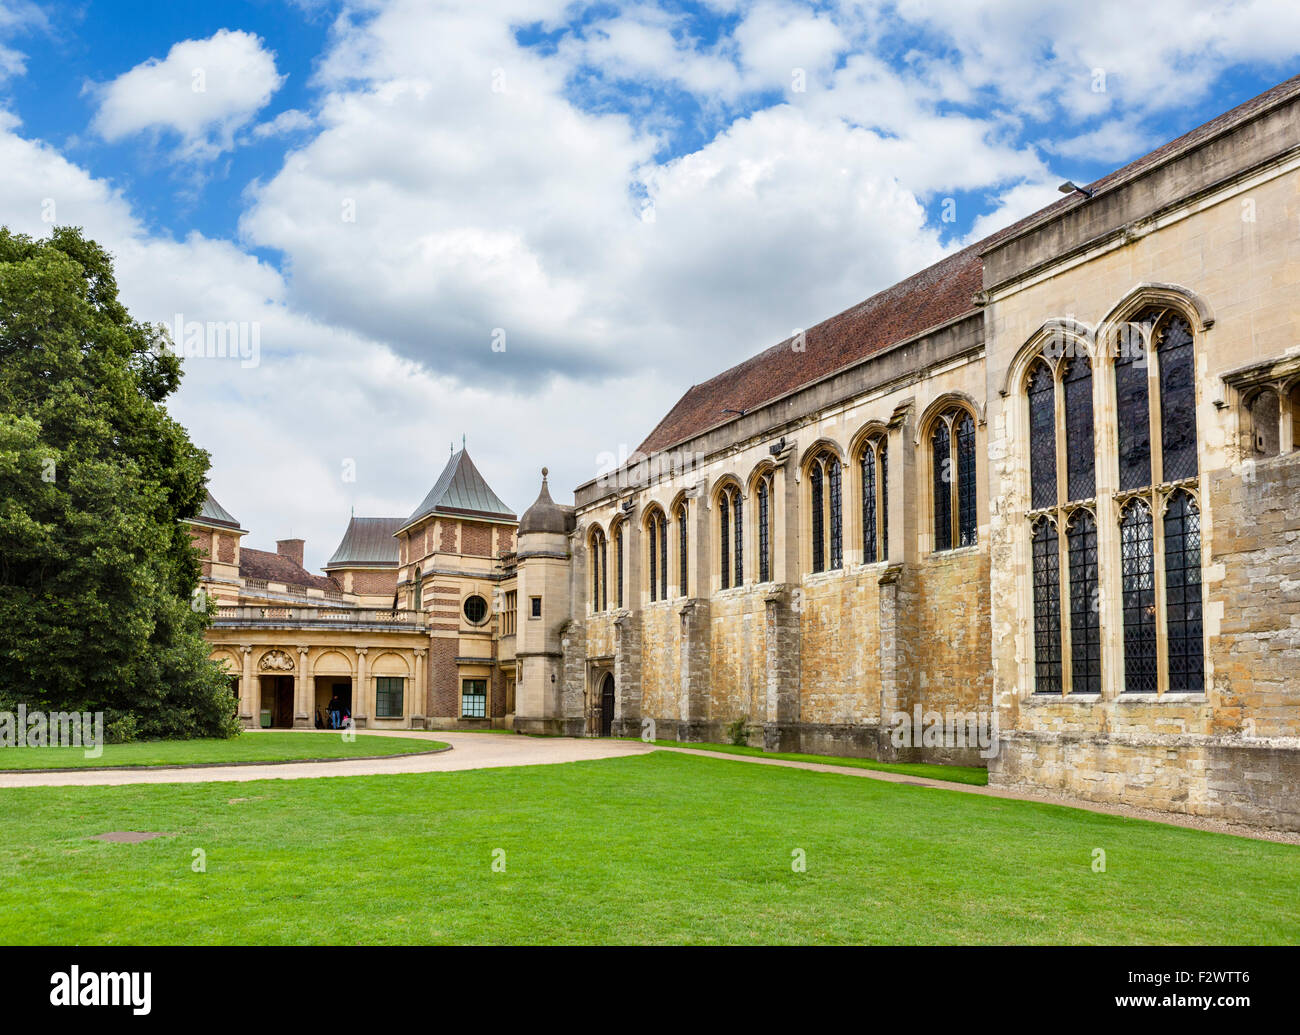 The front of Eltham Palace with the Great Hall to the right, Eltham, London, England, UK Stock Photo